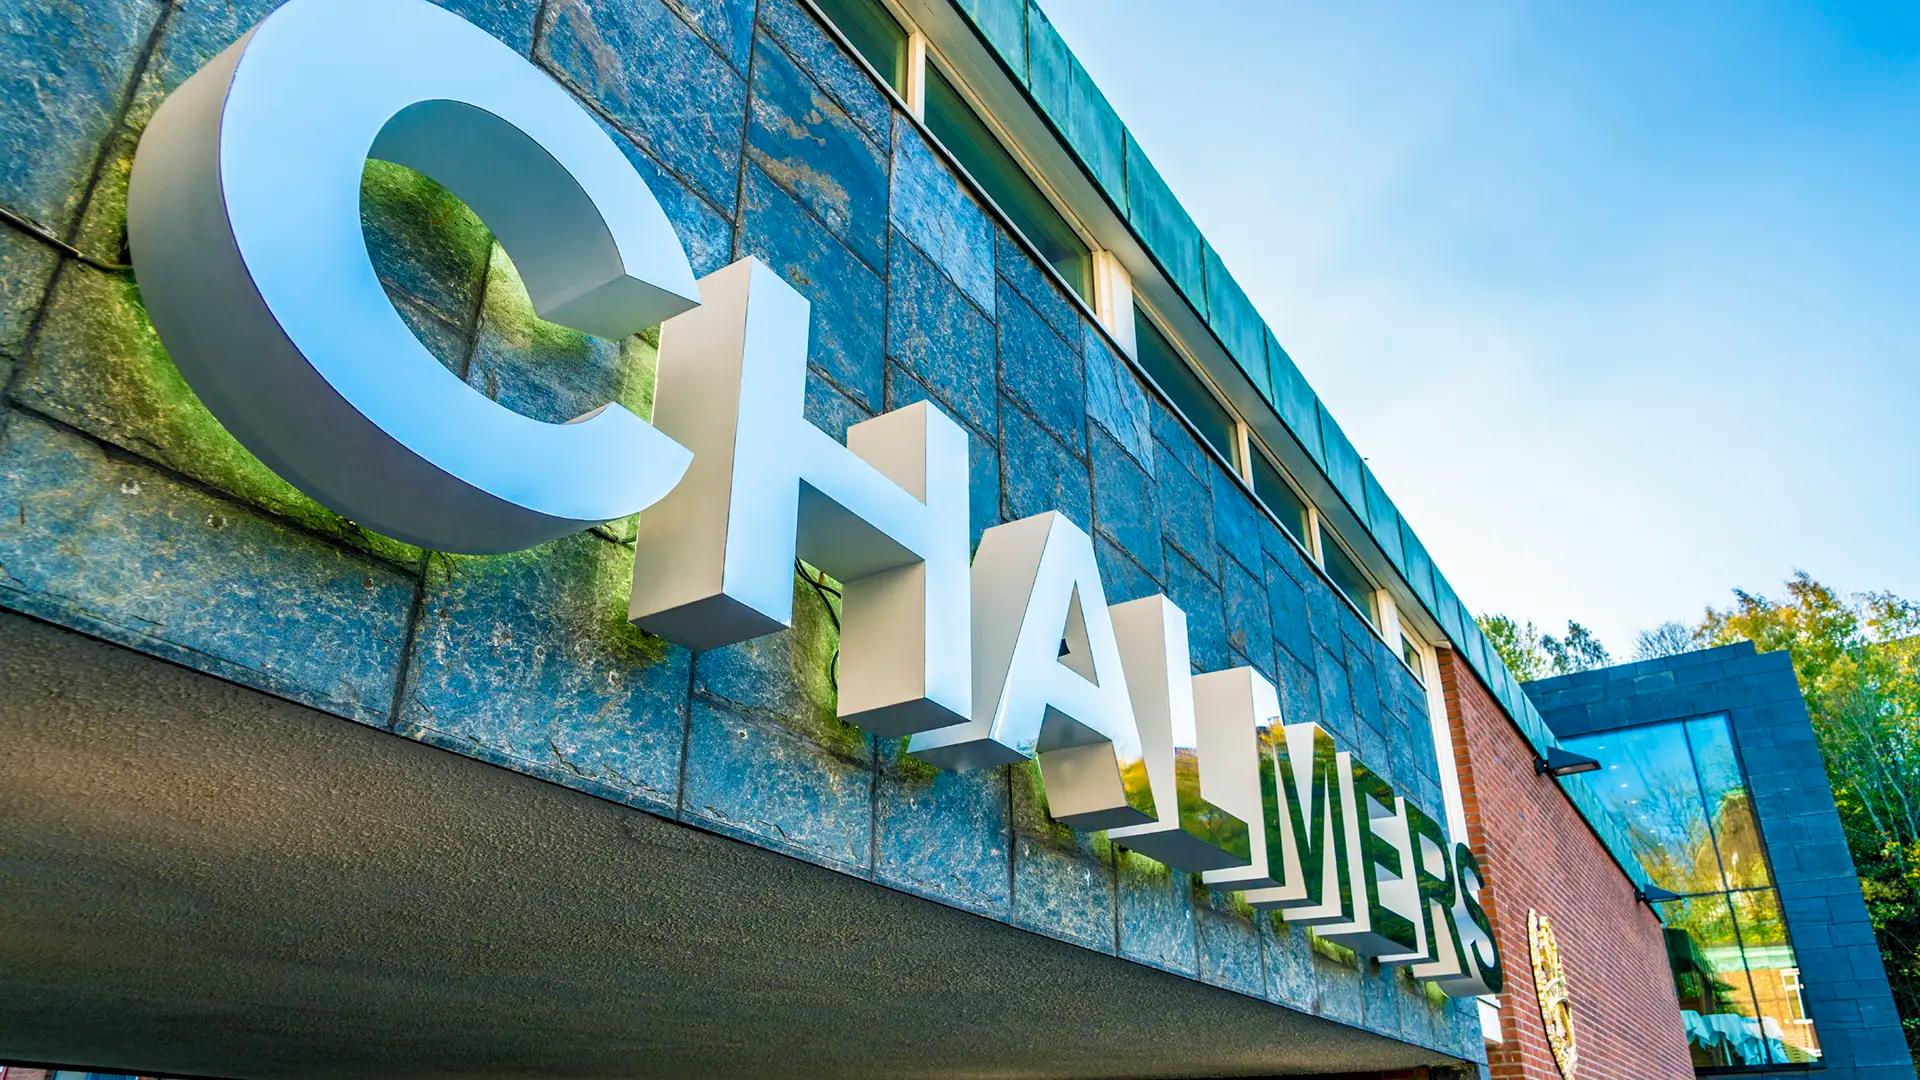 Chalmers logotype on wall.